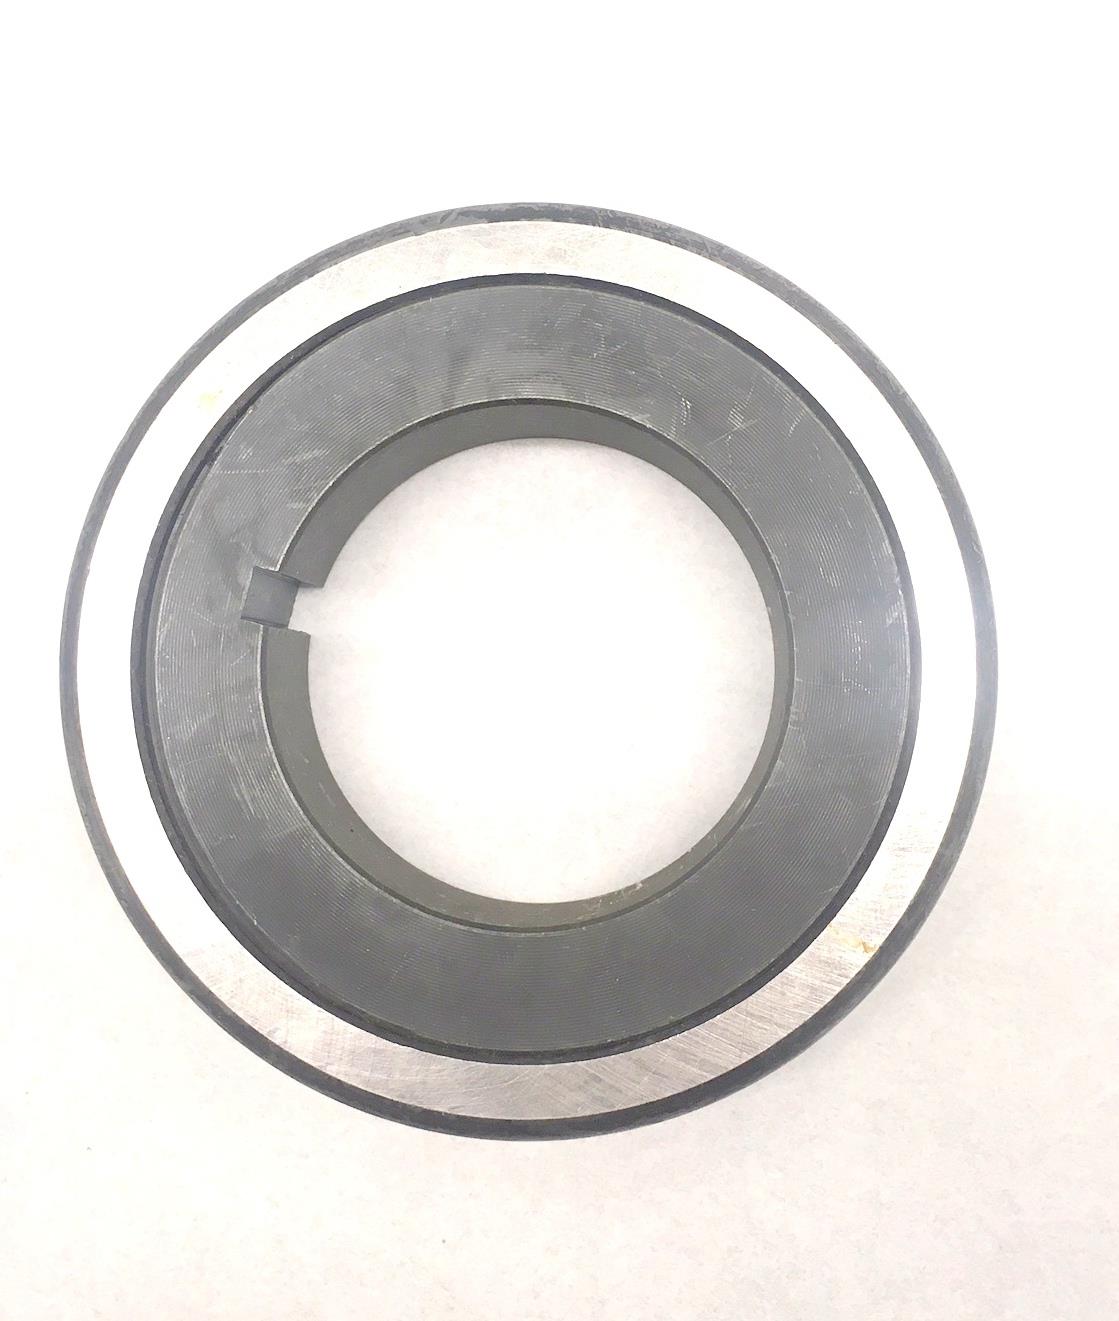 M35-713 | M35-713  Tandem Axle Trunion Tapered Bearing (4).JPG